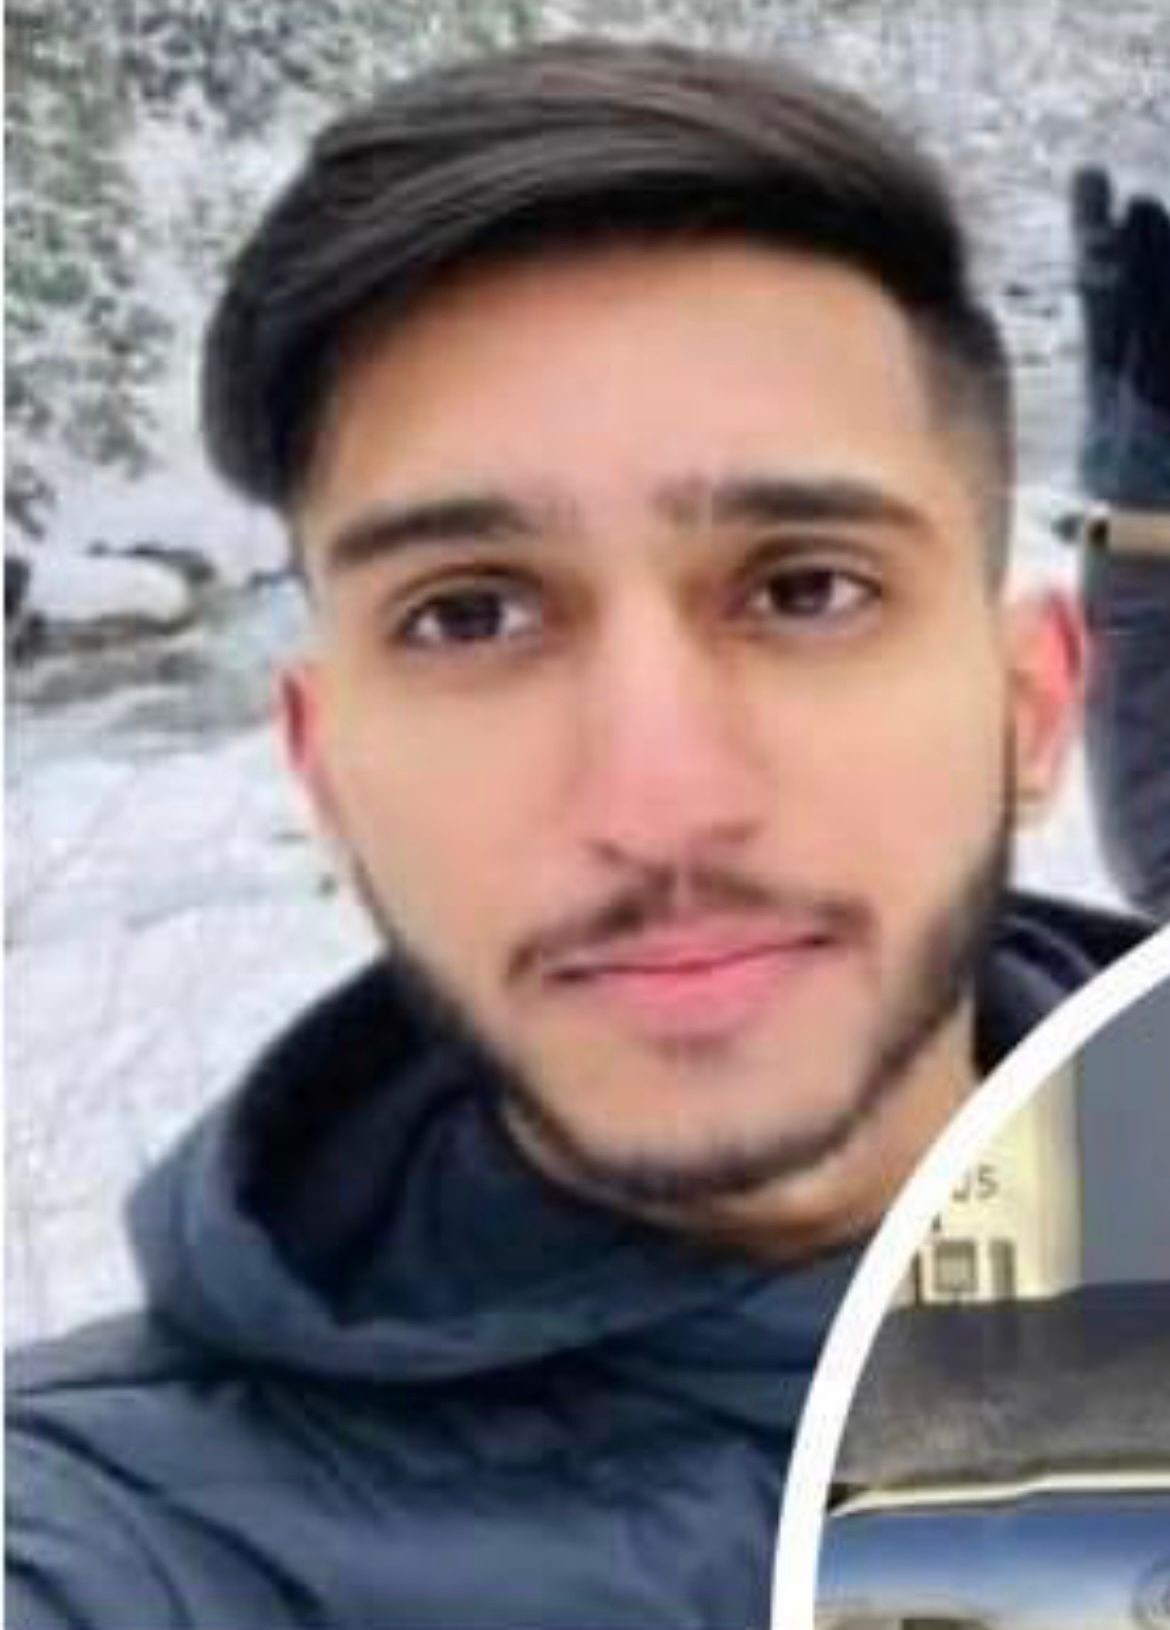 Mehakpreet Sethi was fatally stabbed outside Tamanawis Secondary School on Tuesday, Nov. 22. 